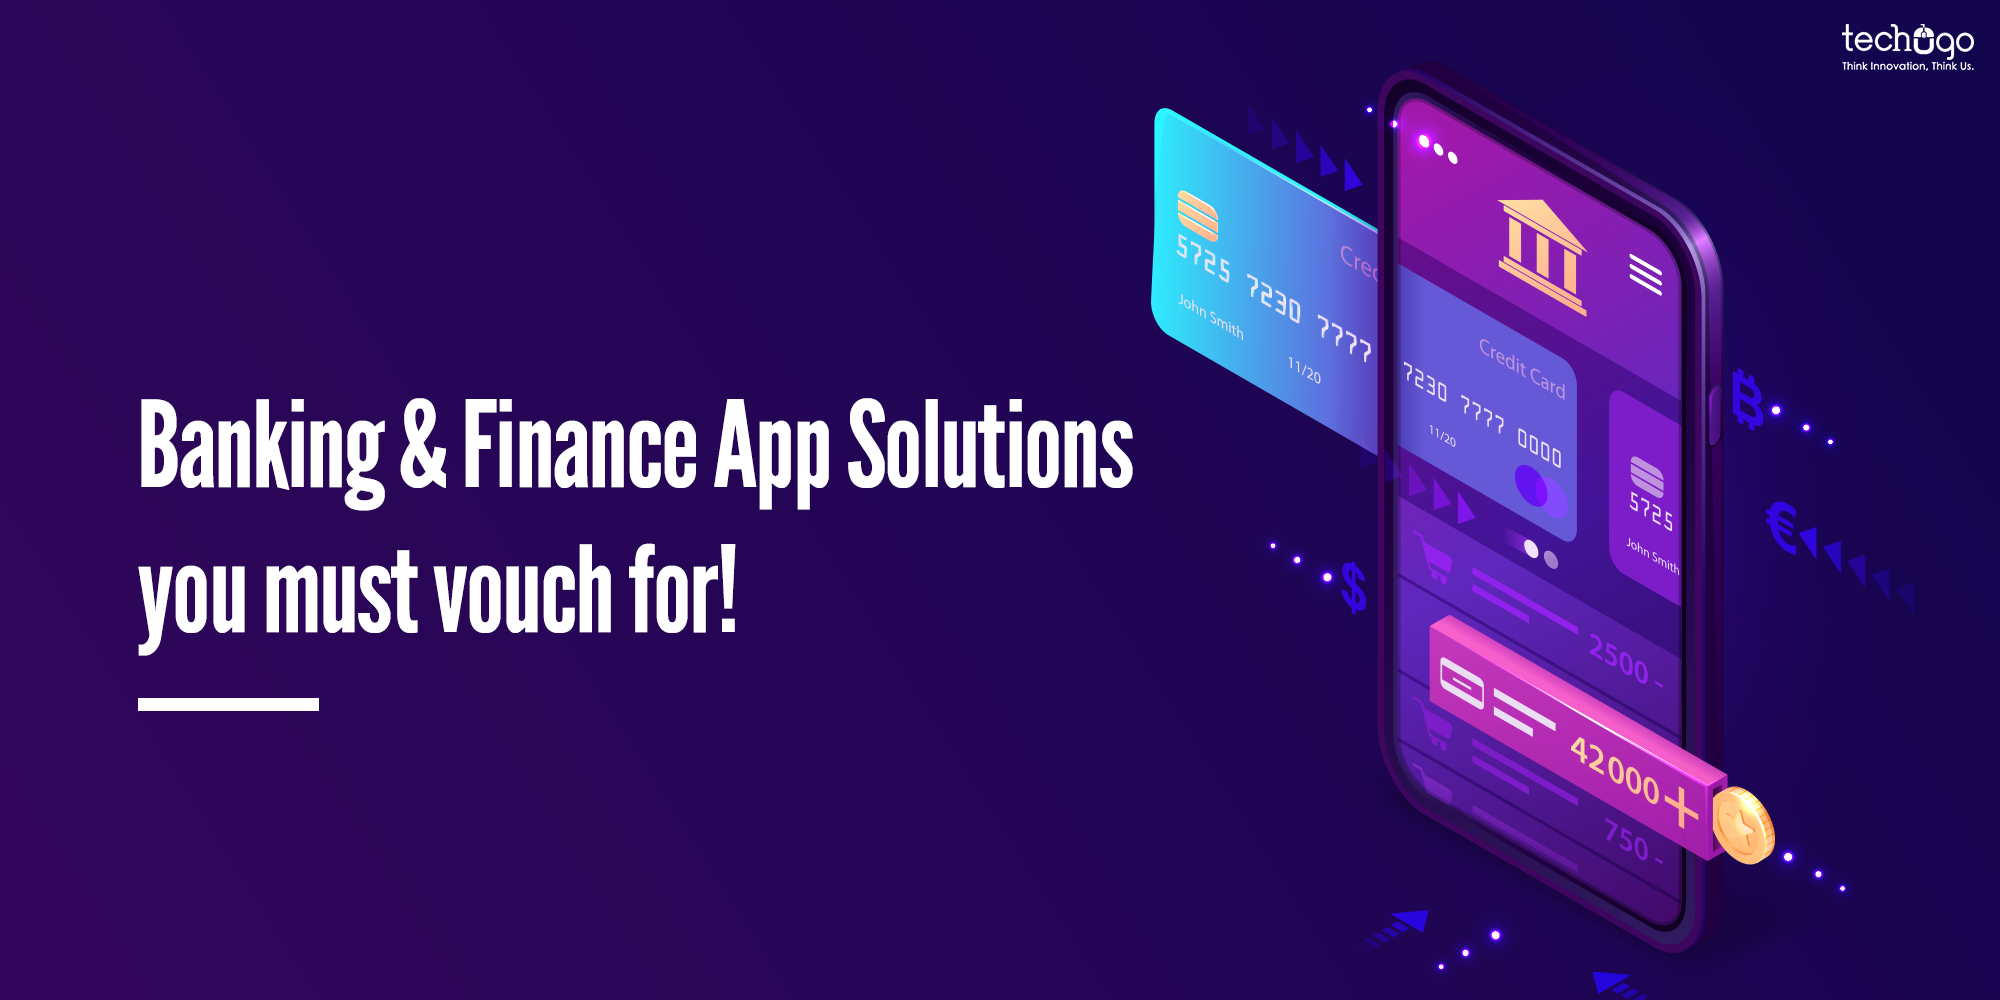 Banking & Finance App Solutions You Must Vouch For!